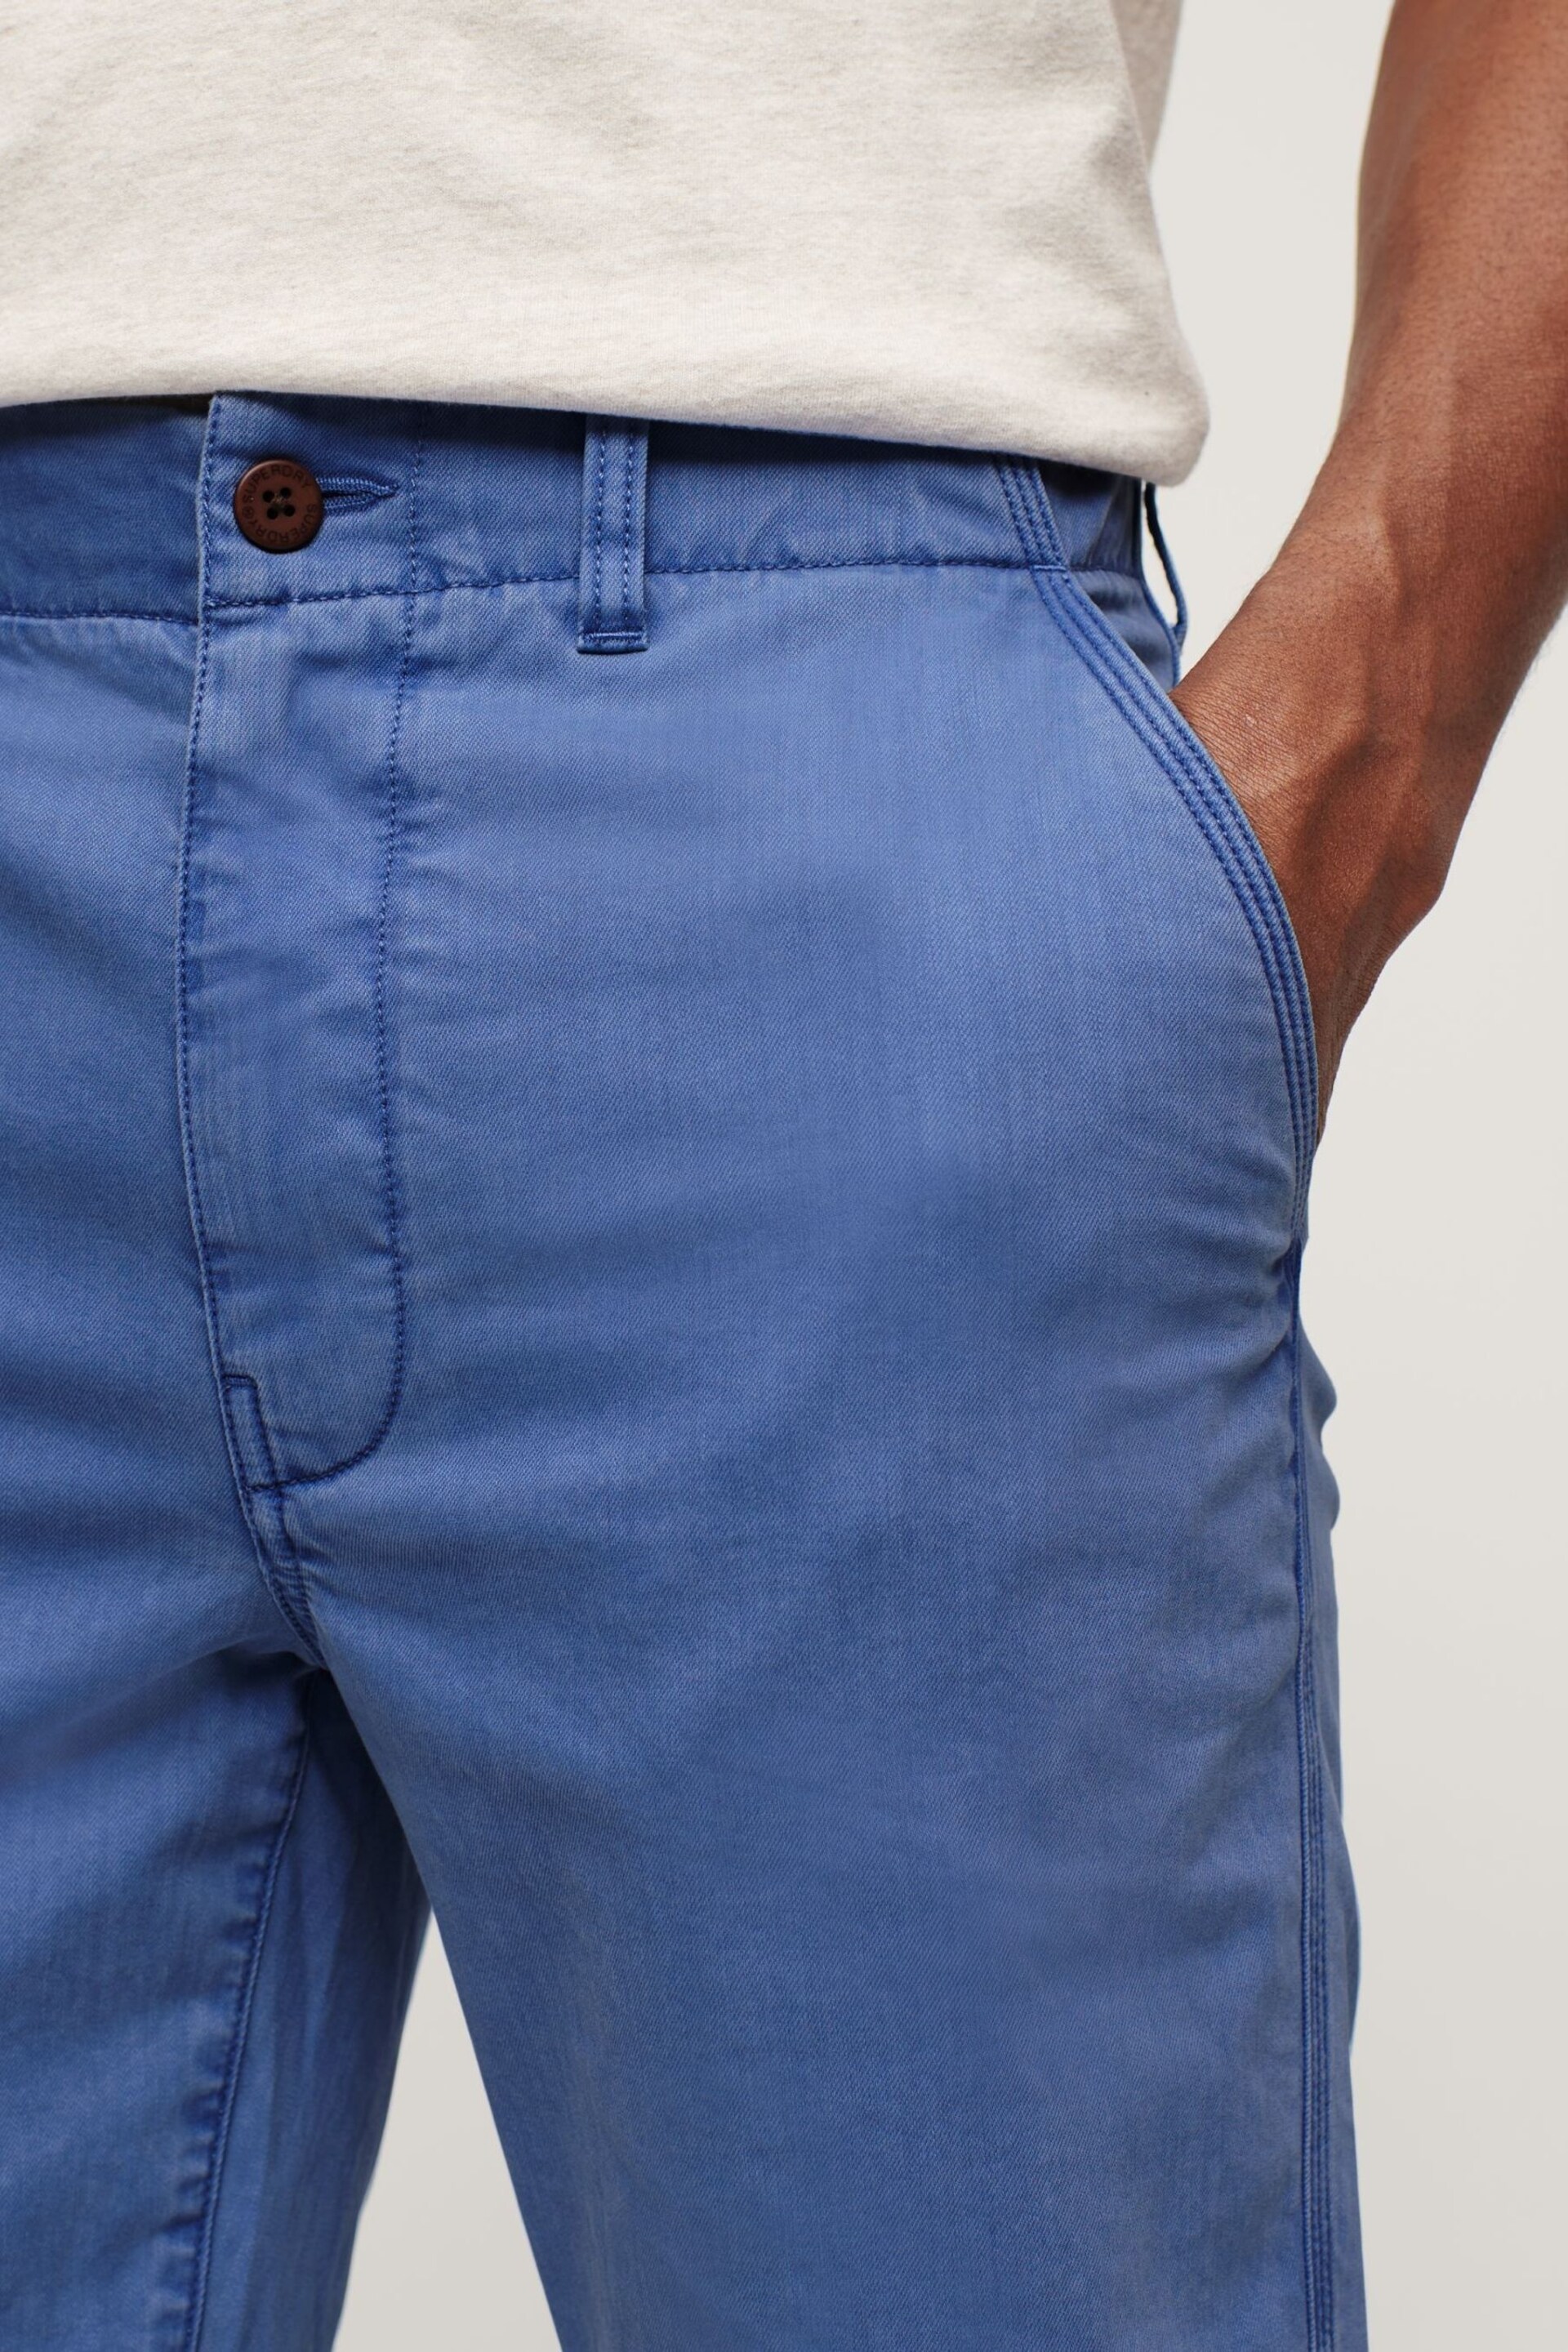 Superdry Blue Officer Chino Shorts - Image 4 of 4